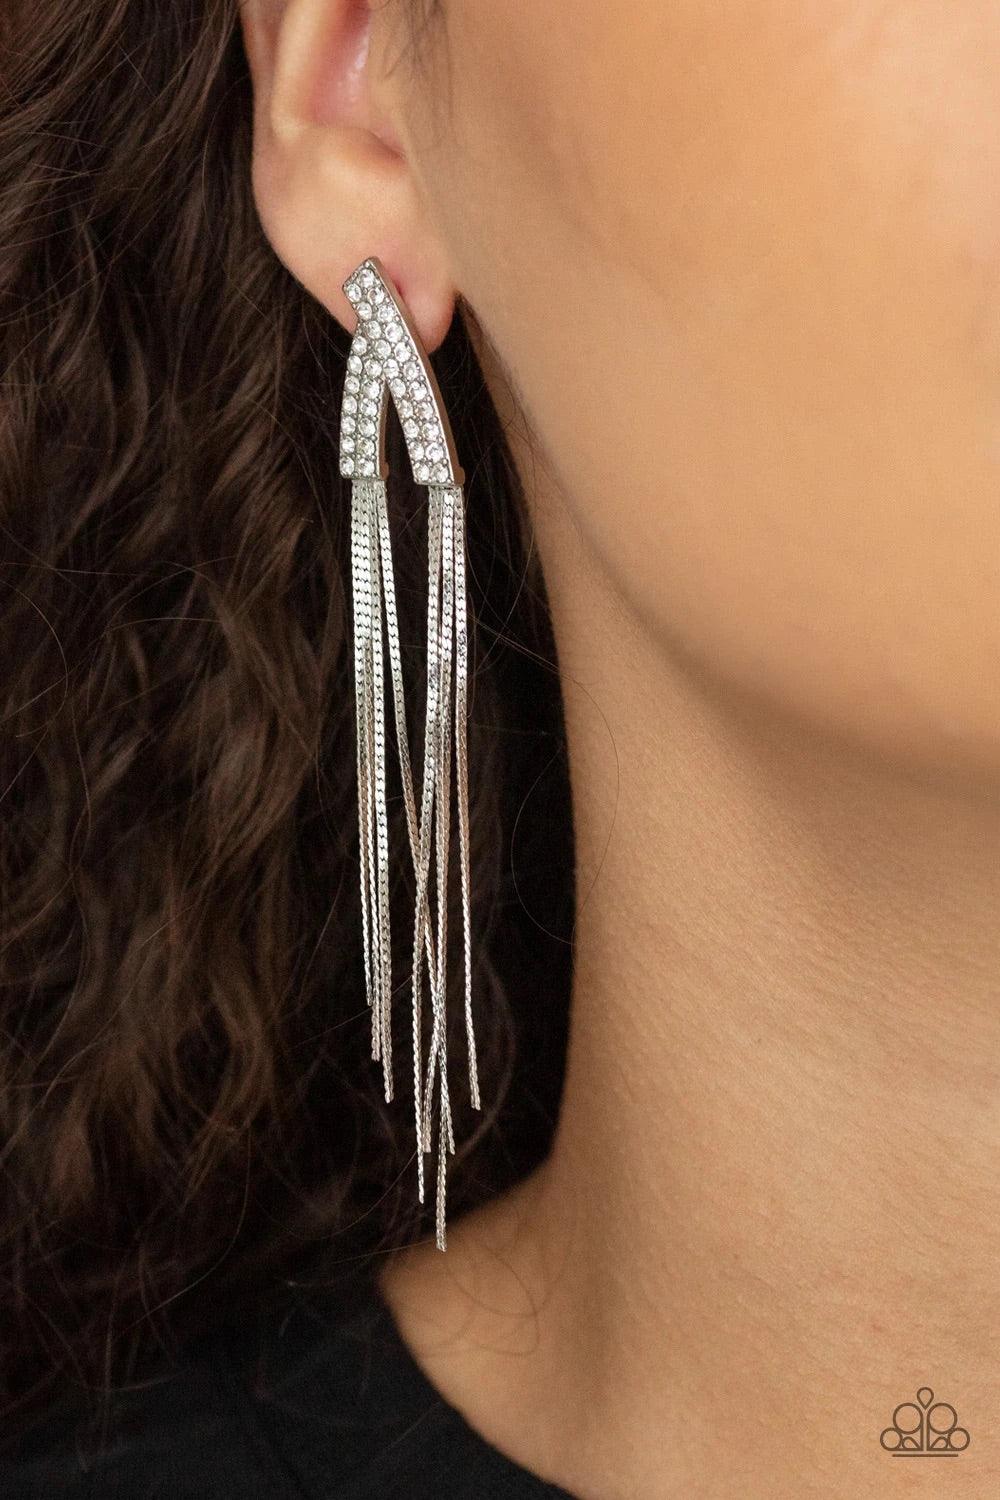 Paparazzi Accessories It Takes Two To TASSEL - White Encrusted in double rows of glassy white rhinestones, two glistening silver frames overlap into a v-shaped frame. Flat silver chains stream from the bottom of the glittery frame, creating an edgy tassel